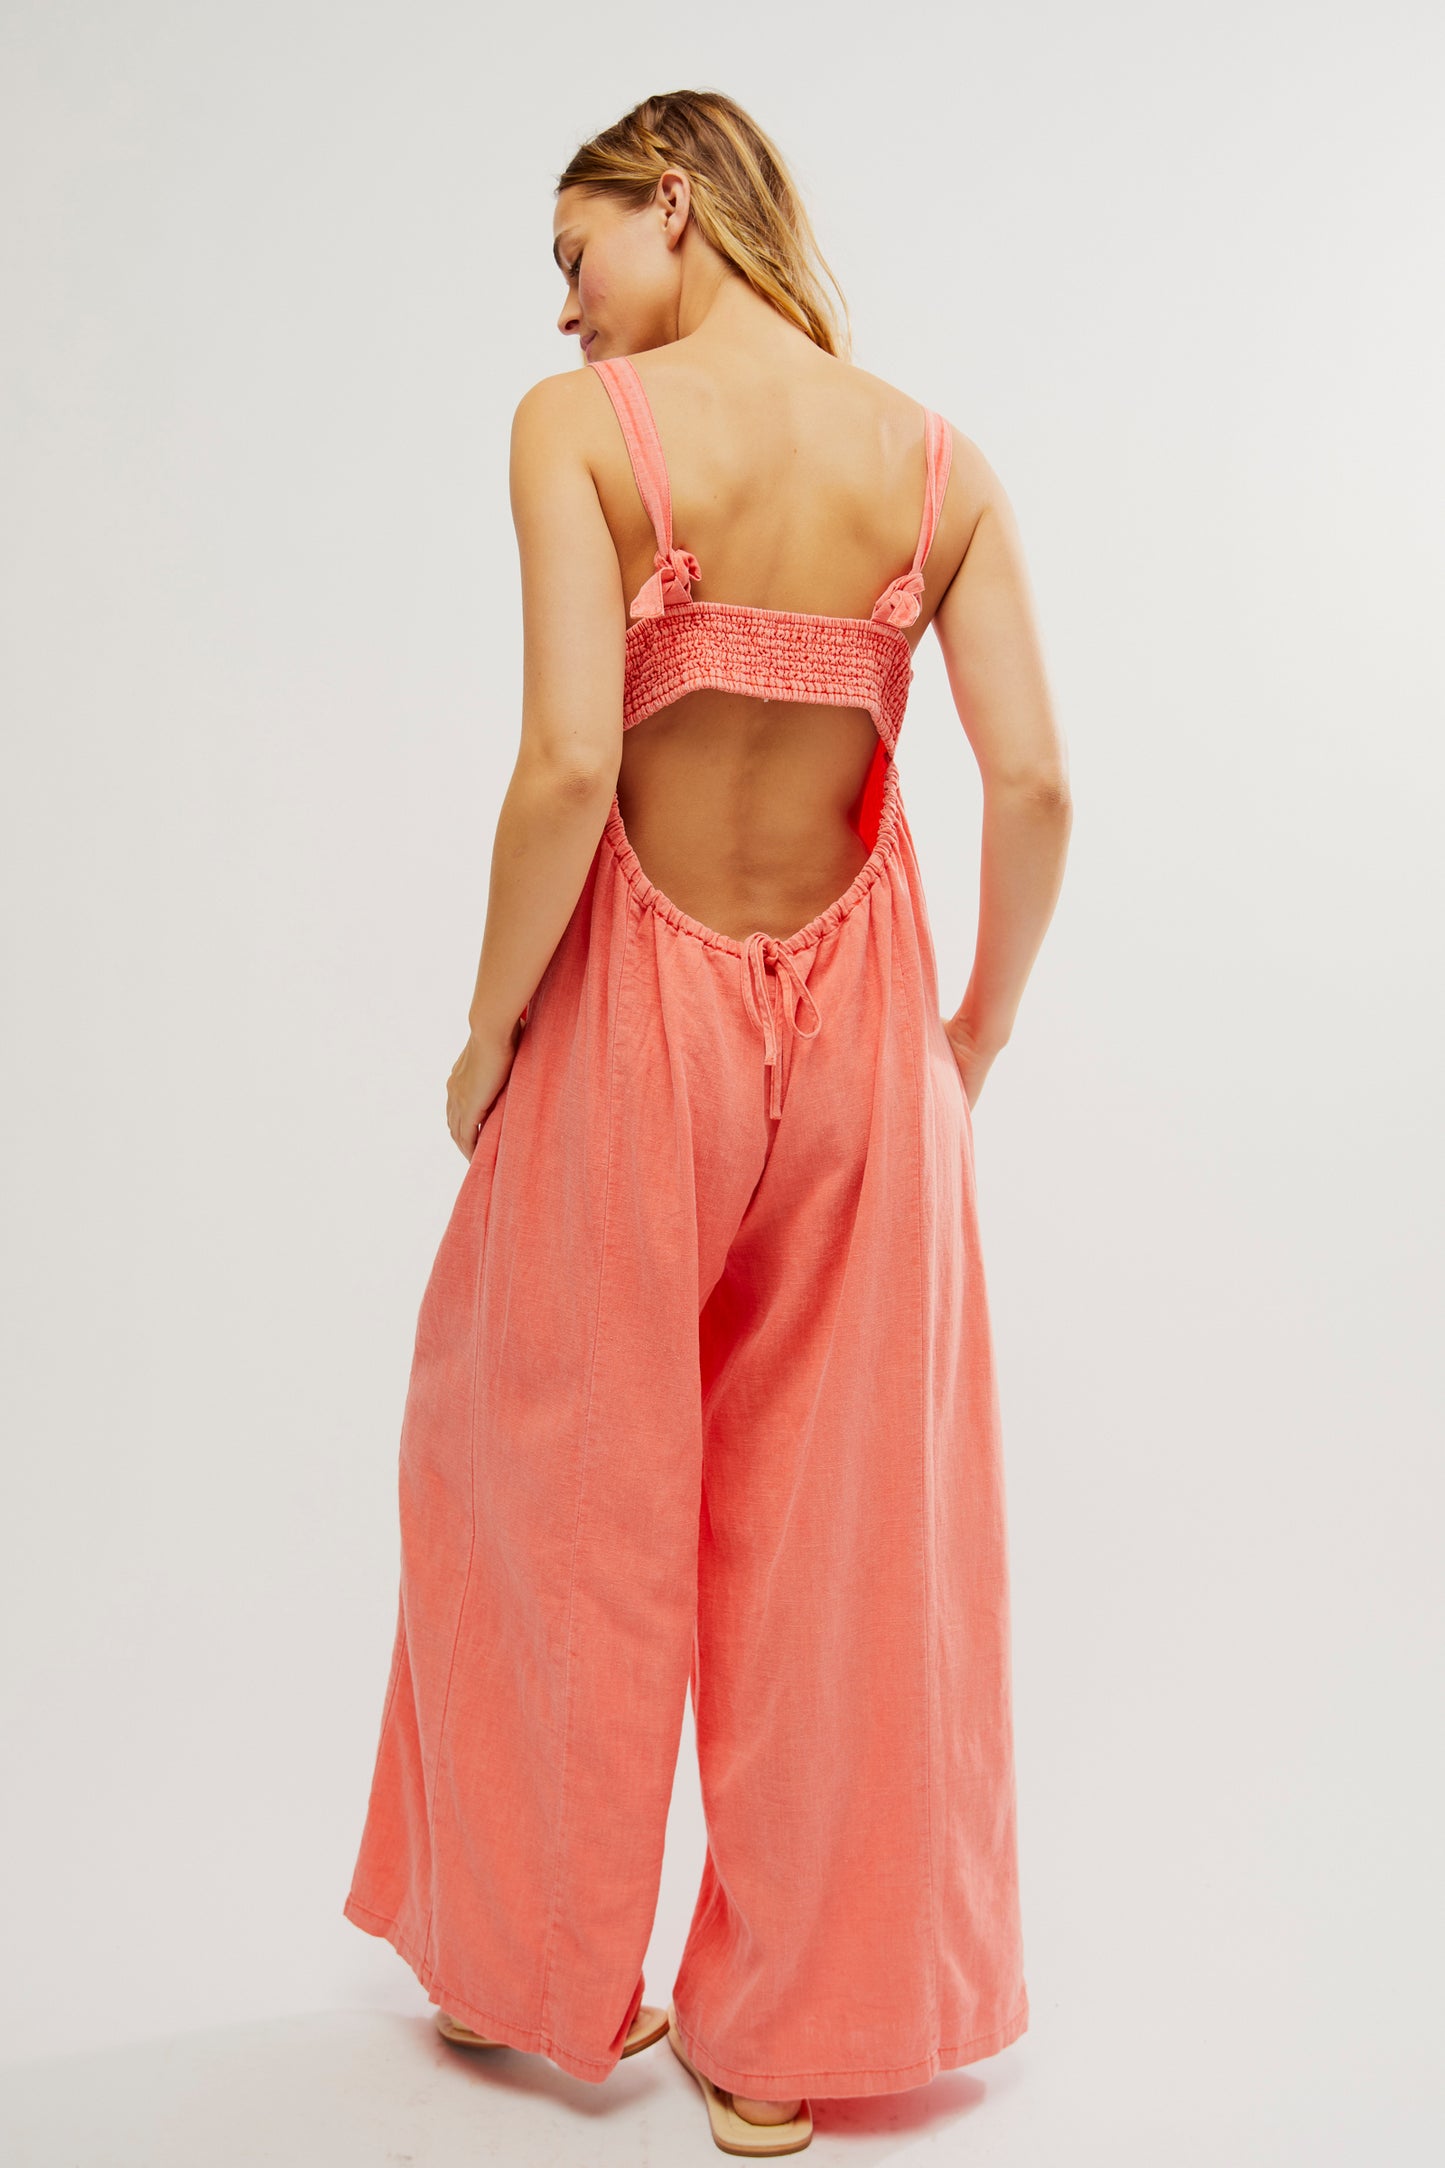 Free People Drifting Dreams One Piece - Radiant Watermelon